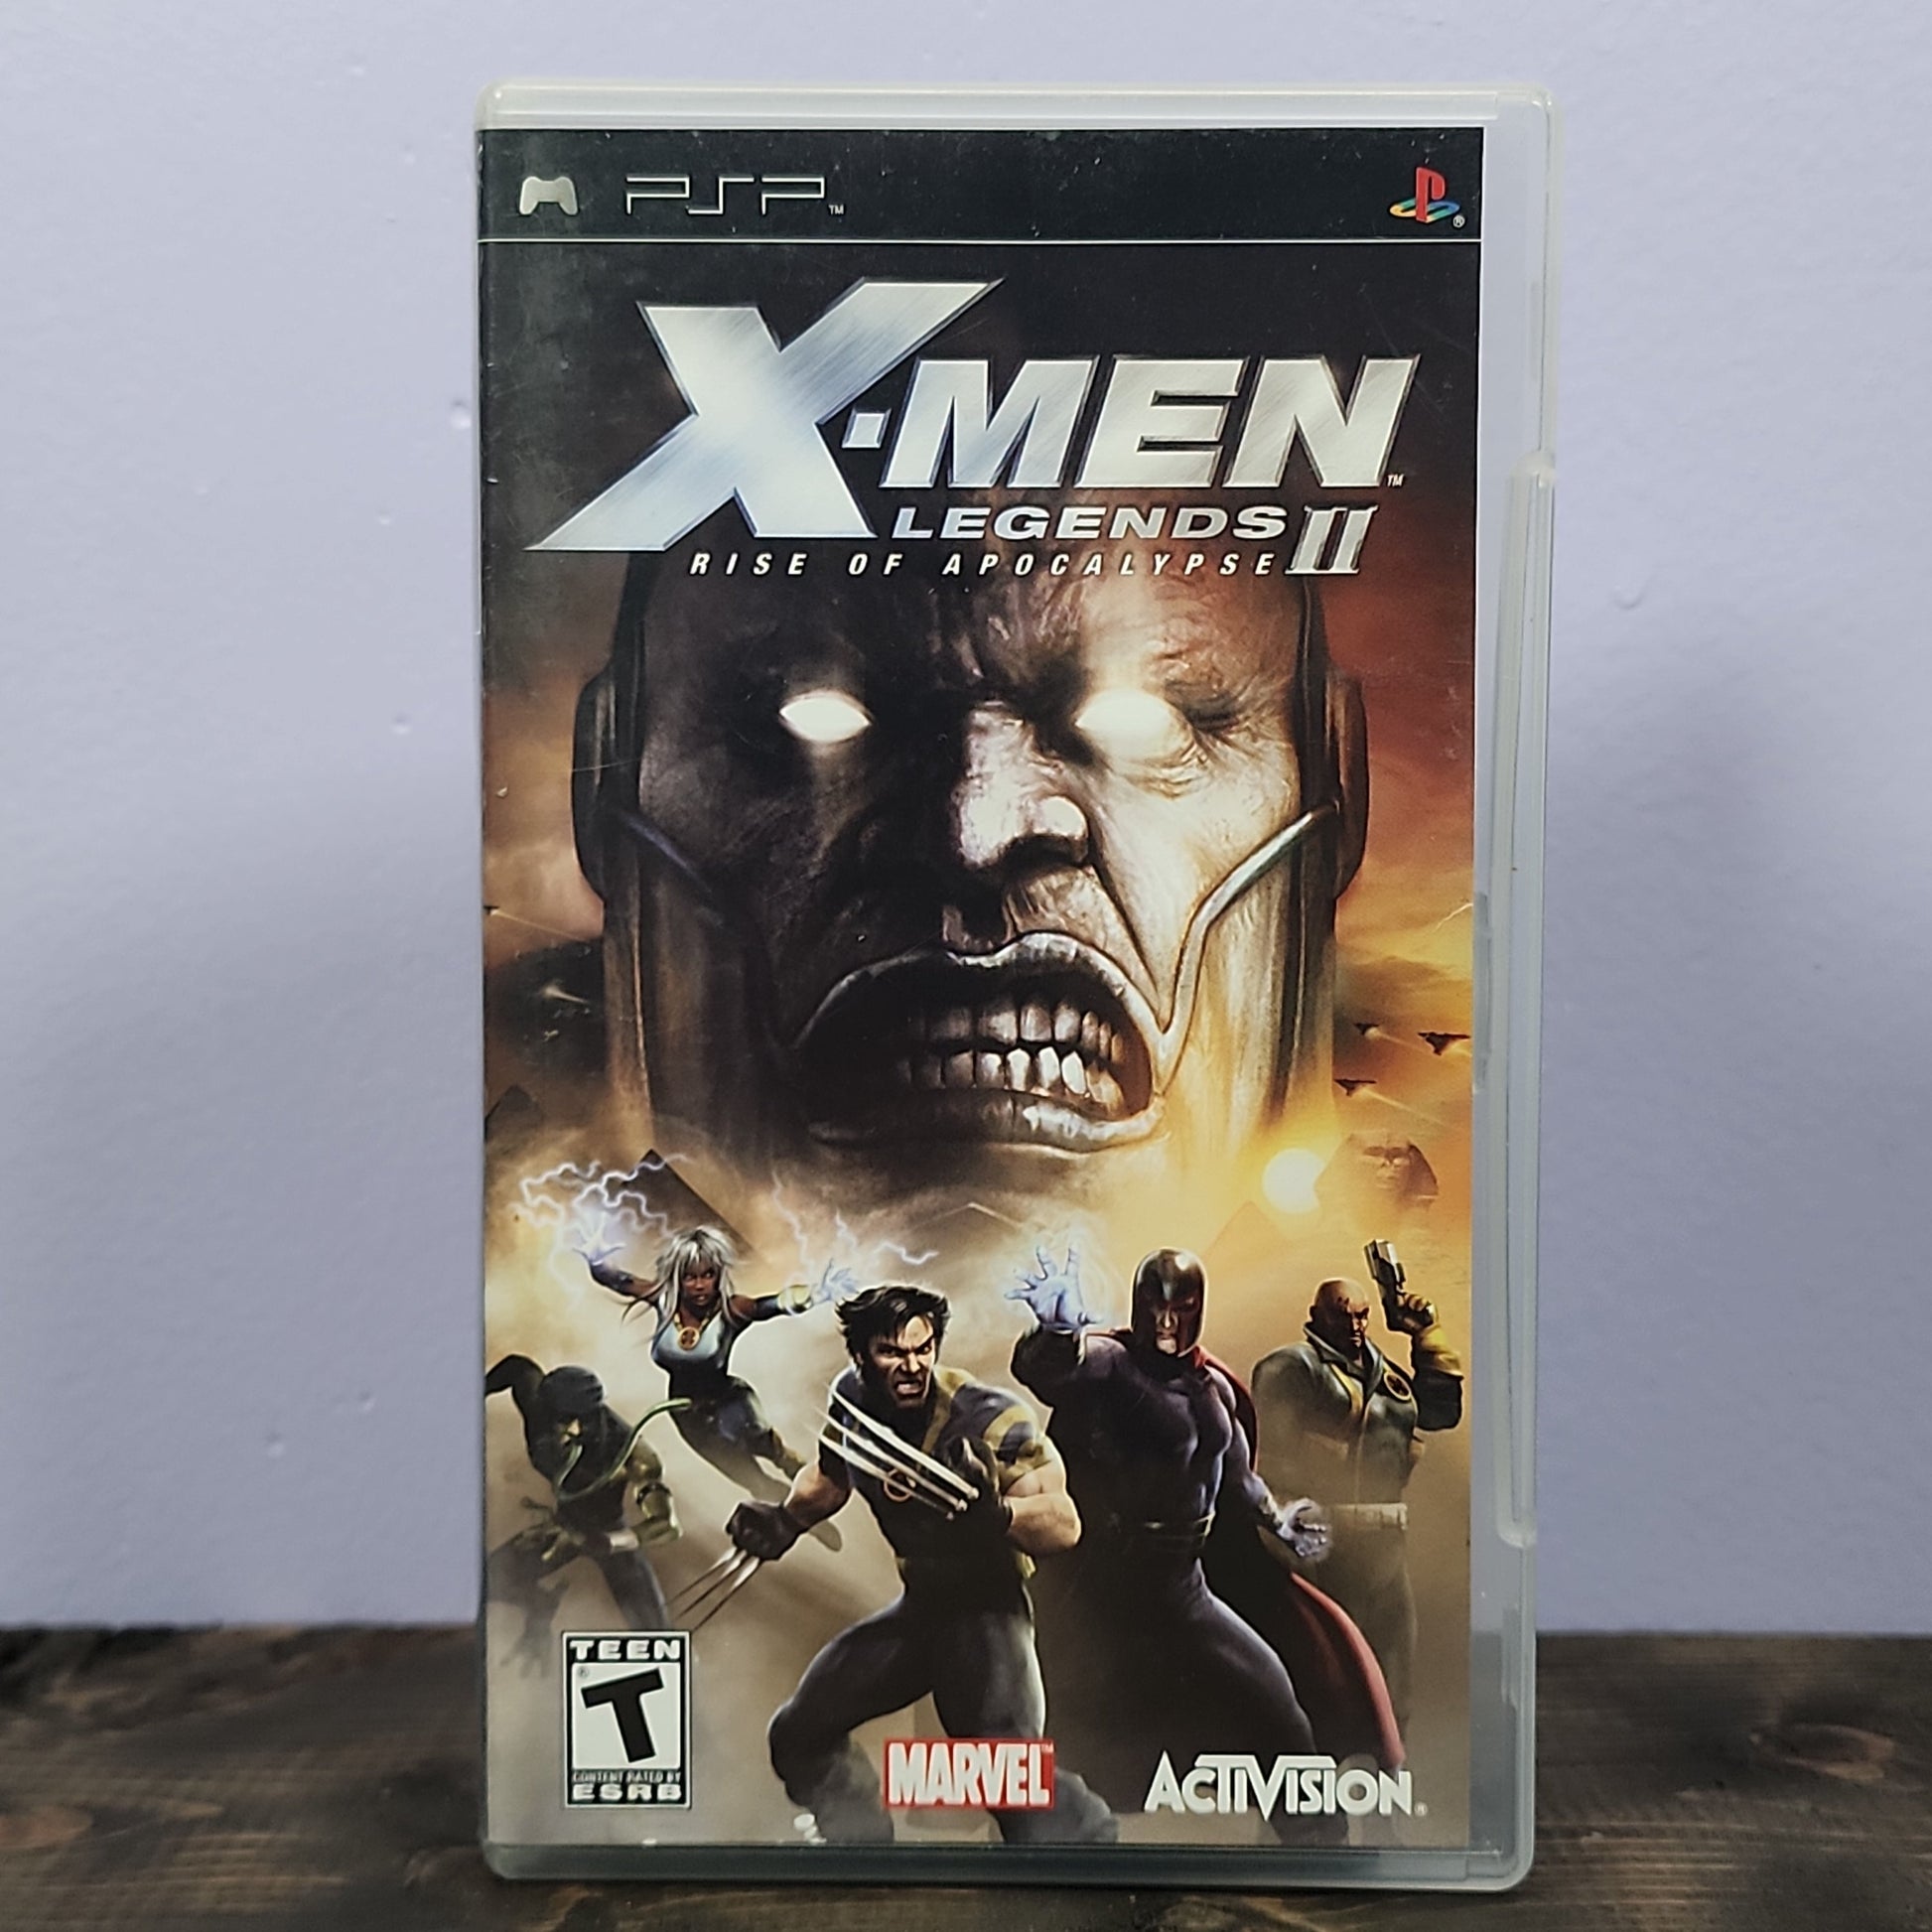 PSP - X-Men Legends II: Rise of Apocalypse Retrograde Collectibles Action, Activision, CIB, Marvel, Playstation Portable, PSP, Raven Software, RPG, Superhero, T Rated, Preowned Video Game 